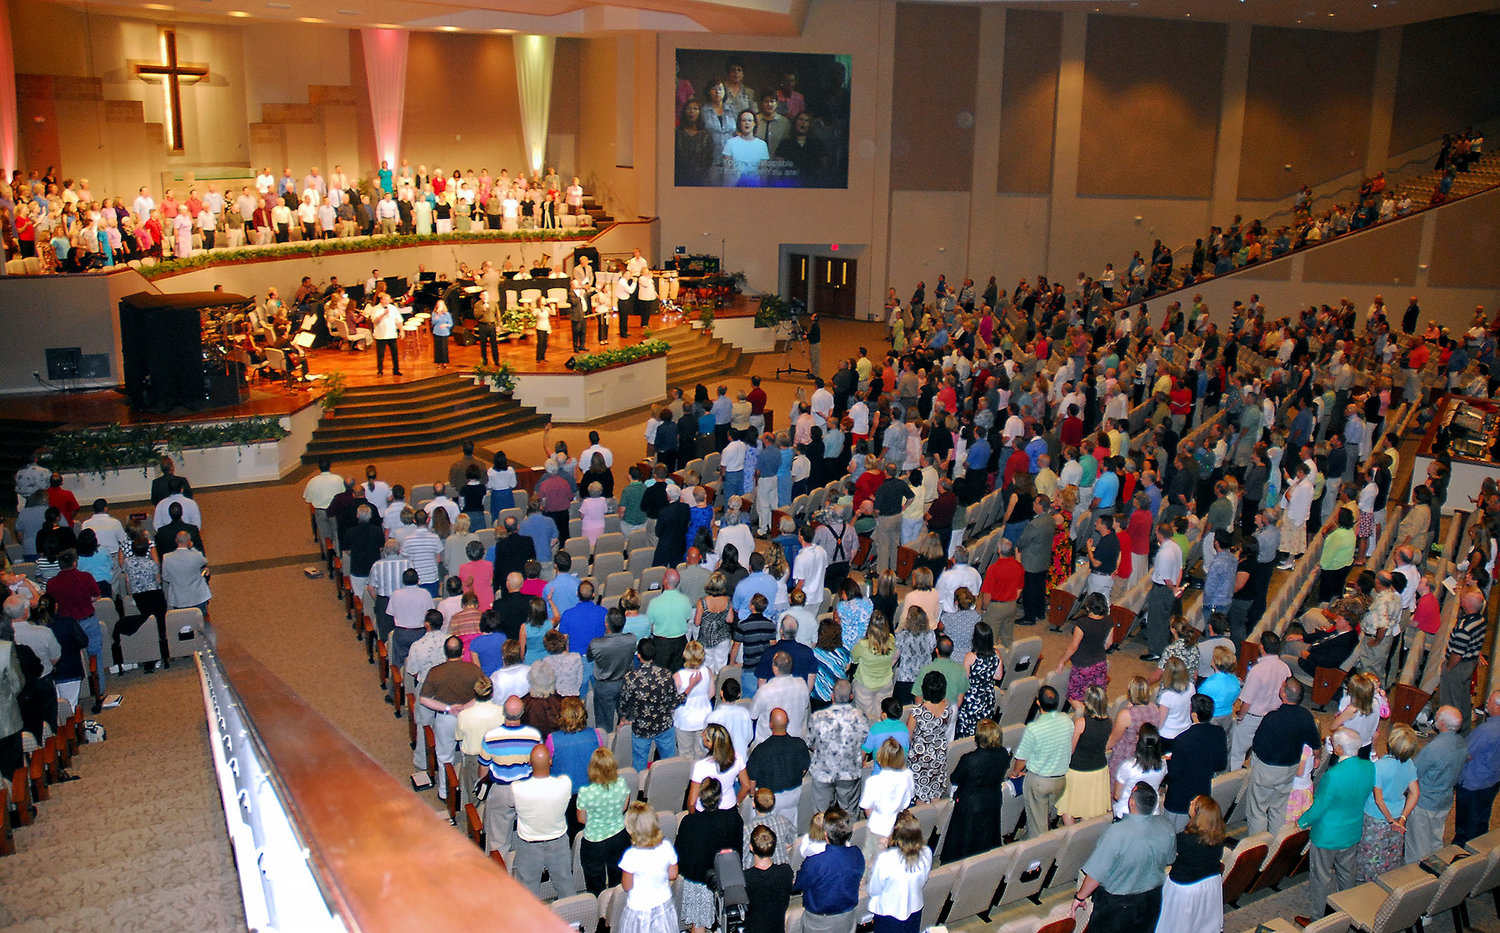 Worshippers attend service at Hebron Baptist Church in Dacula, Ga., in the 2010s. The church celebrated its 180th anniversary this past Sunday. (Photo/Hebron Baptist Church)